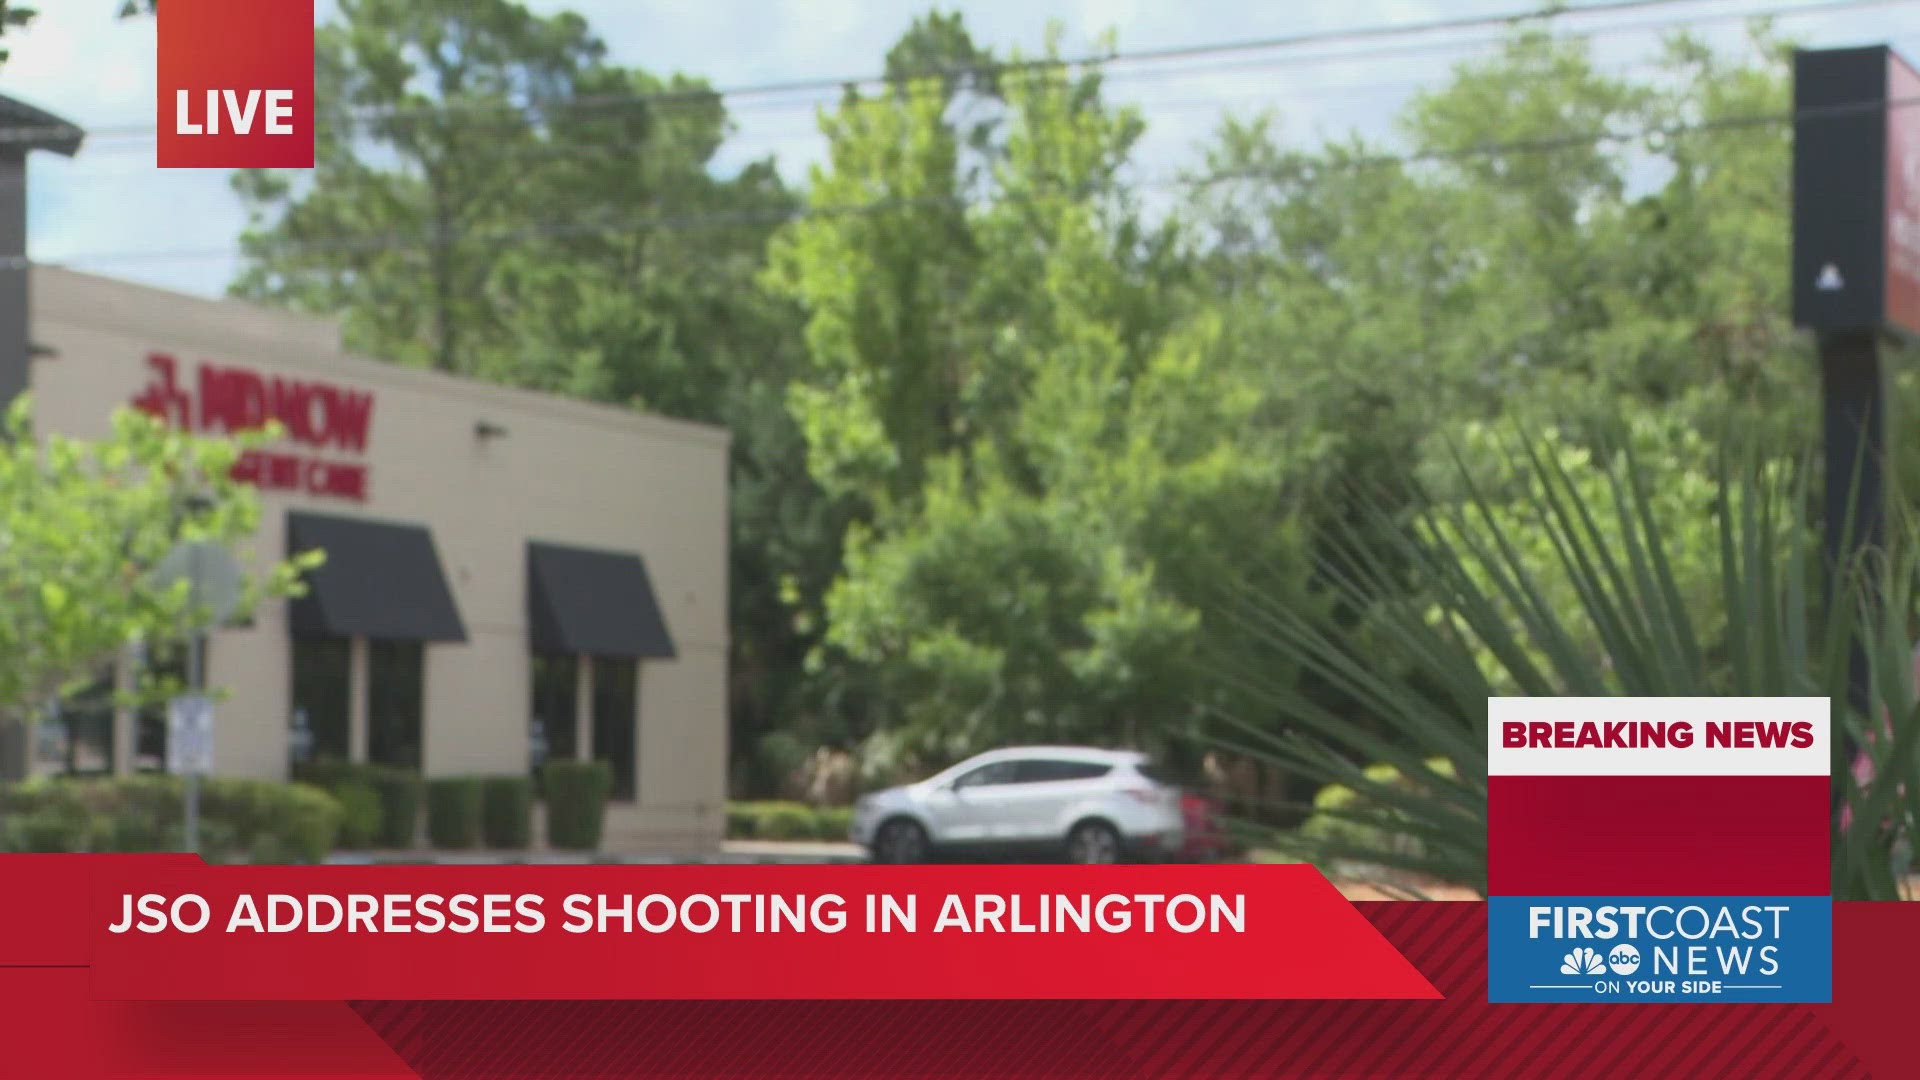 Police say a man was shot in his lower extremities around 5:45 a.m.